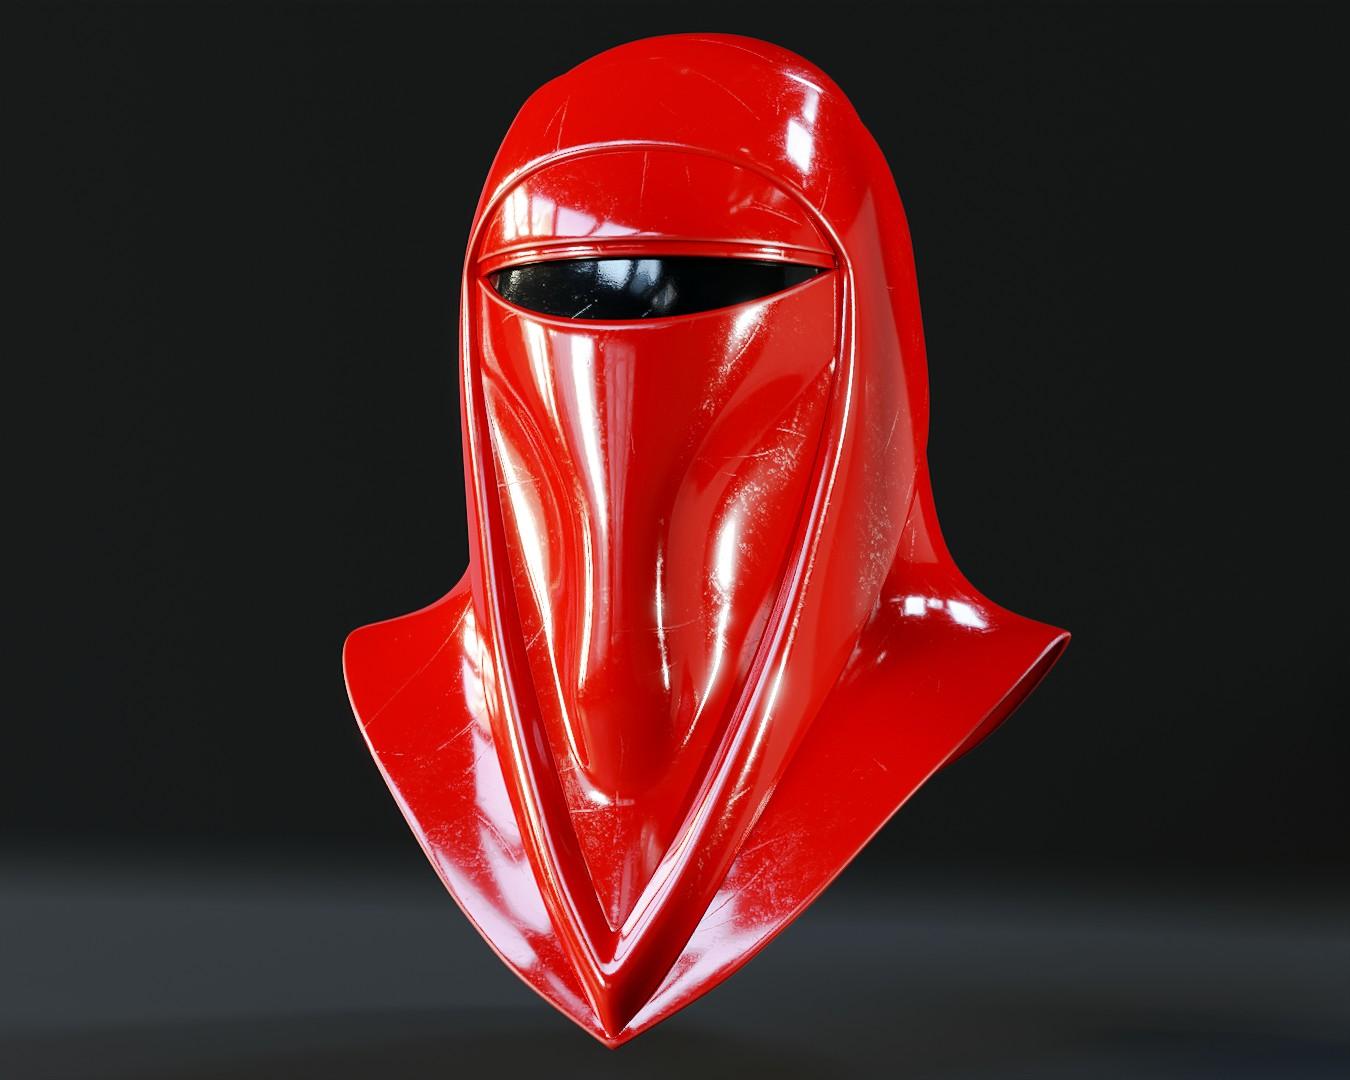 [New Files!] The Royal Guard helmet has been added to the Specialist rewards!